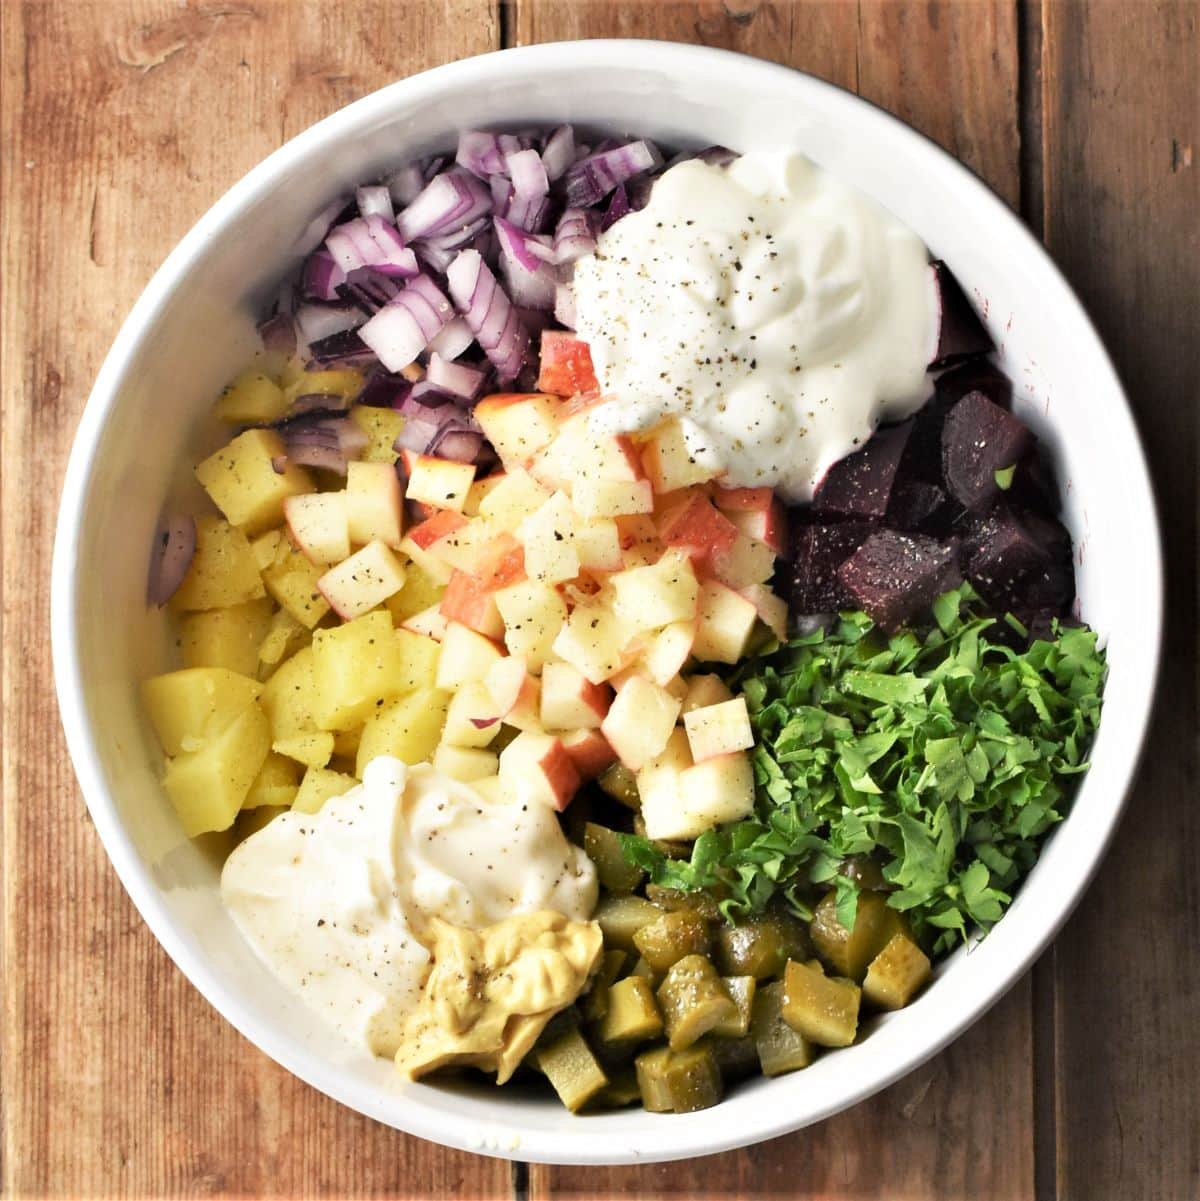 Chopped vegetables, herbs and yogurt in mixing bowl.